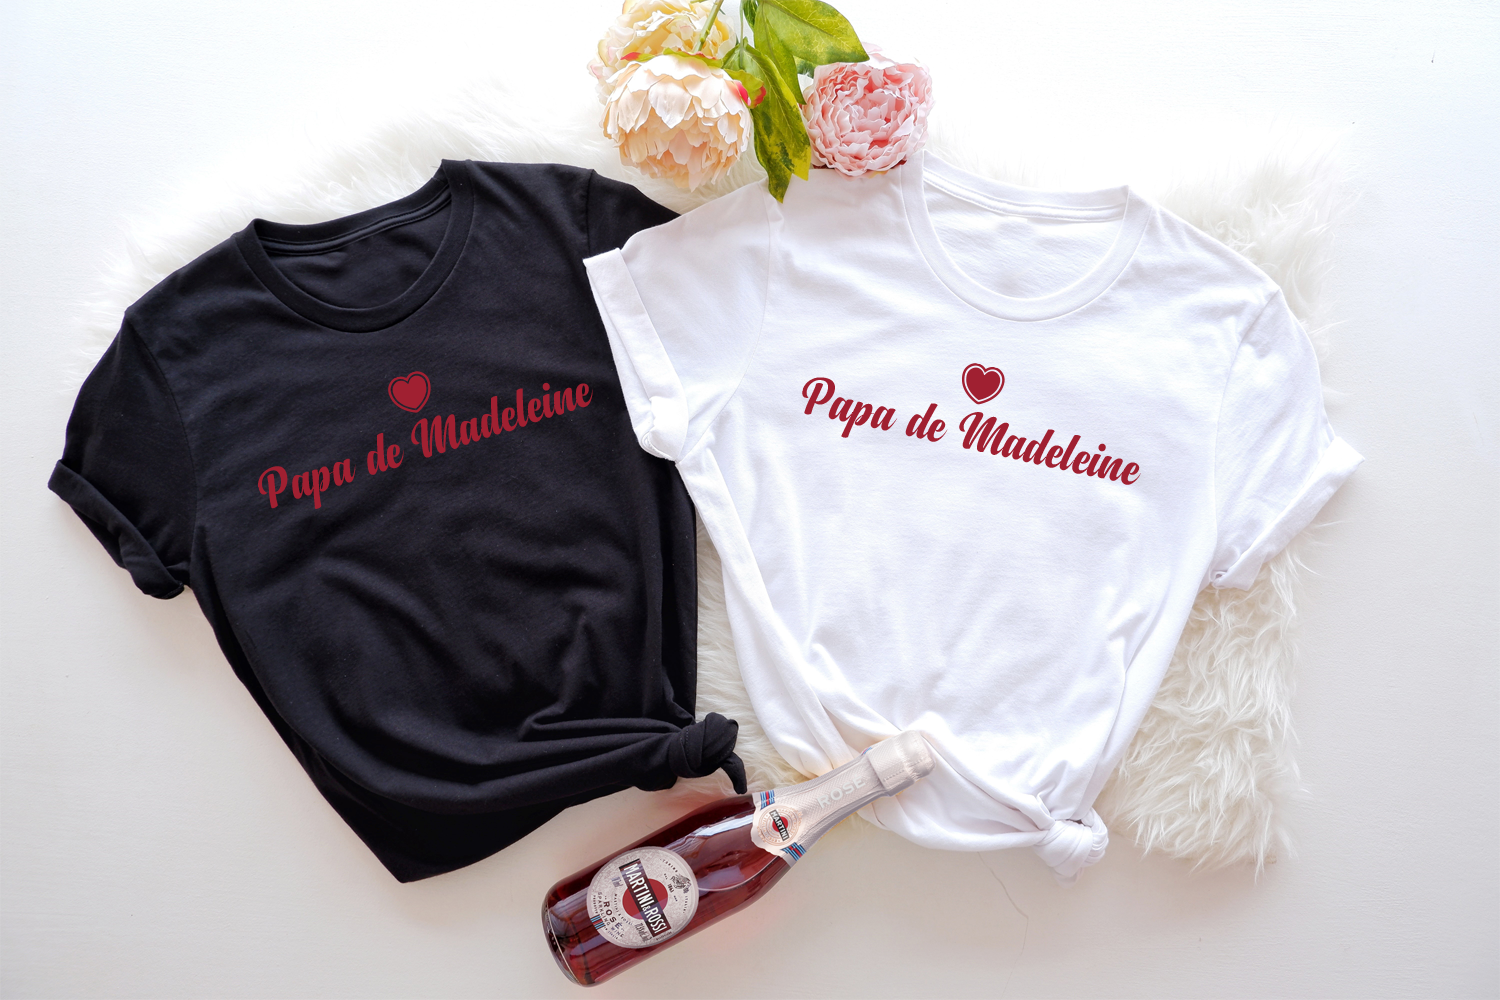 Add a touch of personalization and style to your wardrobe with our custom embroidered t-shirts! 